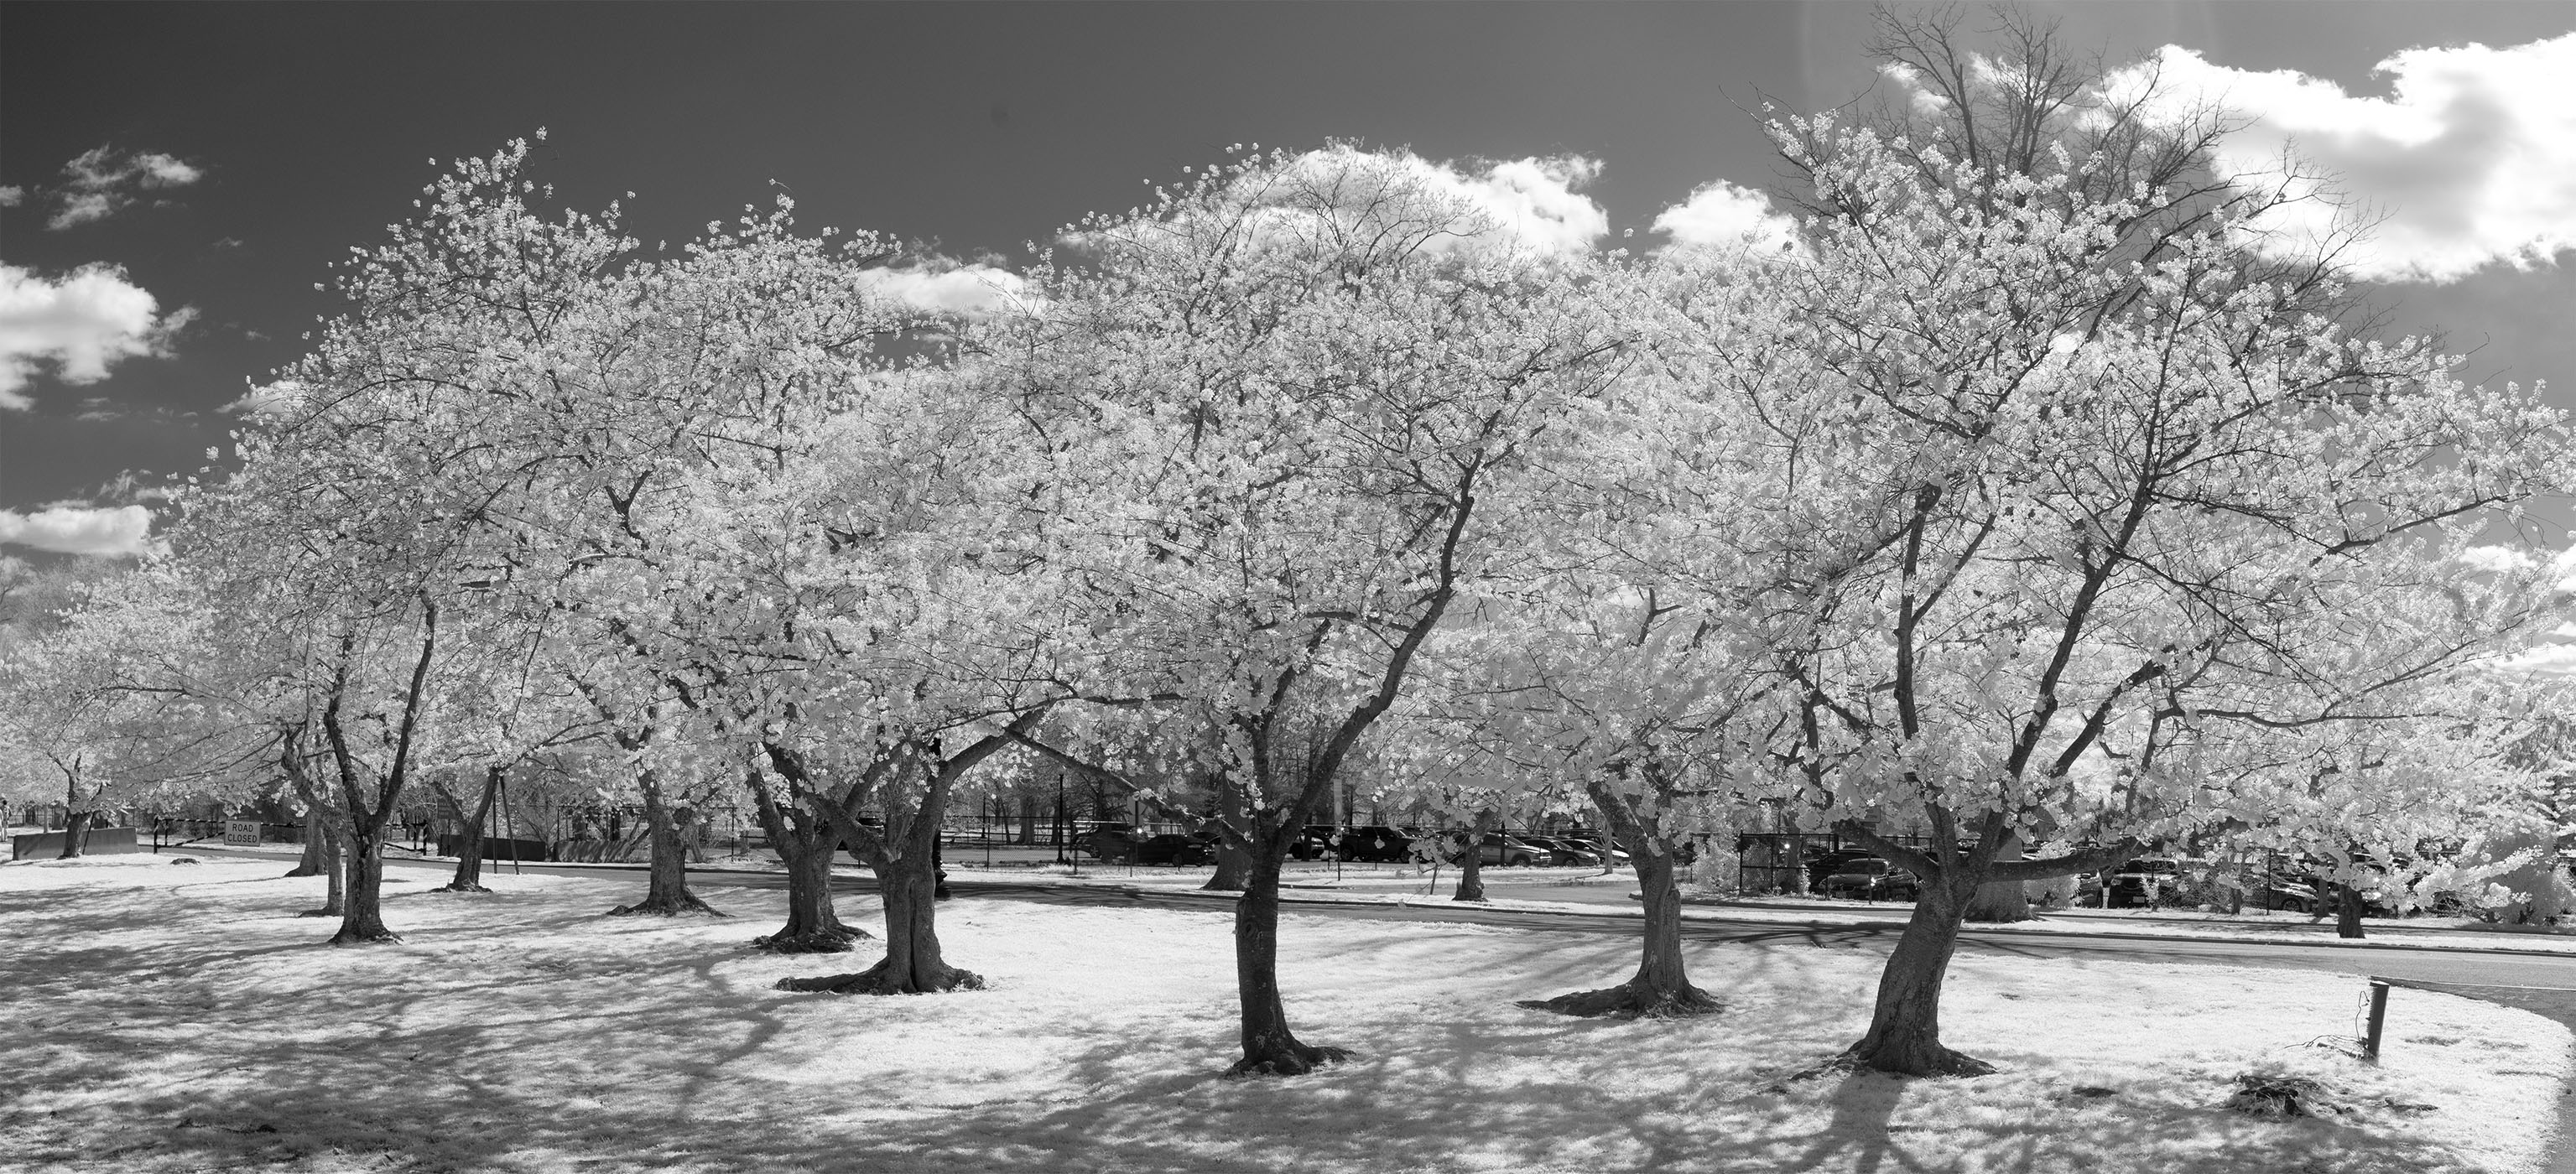 Infrared Photo of Clump of Cherry Trees in Full Bloom